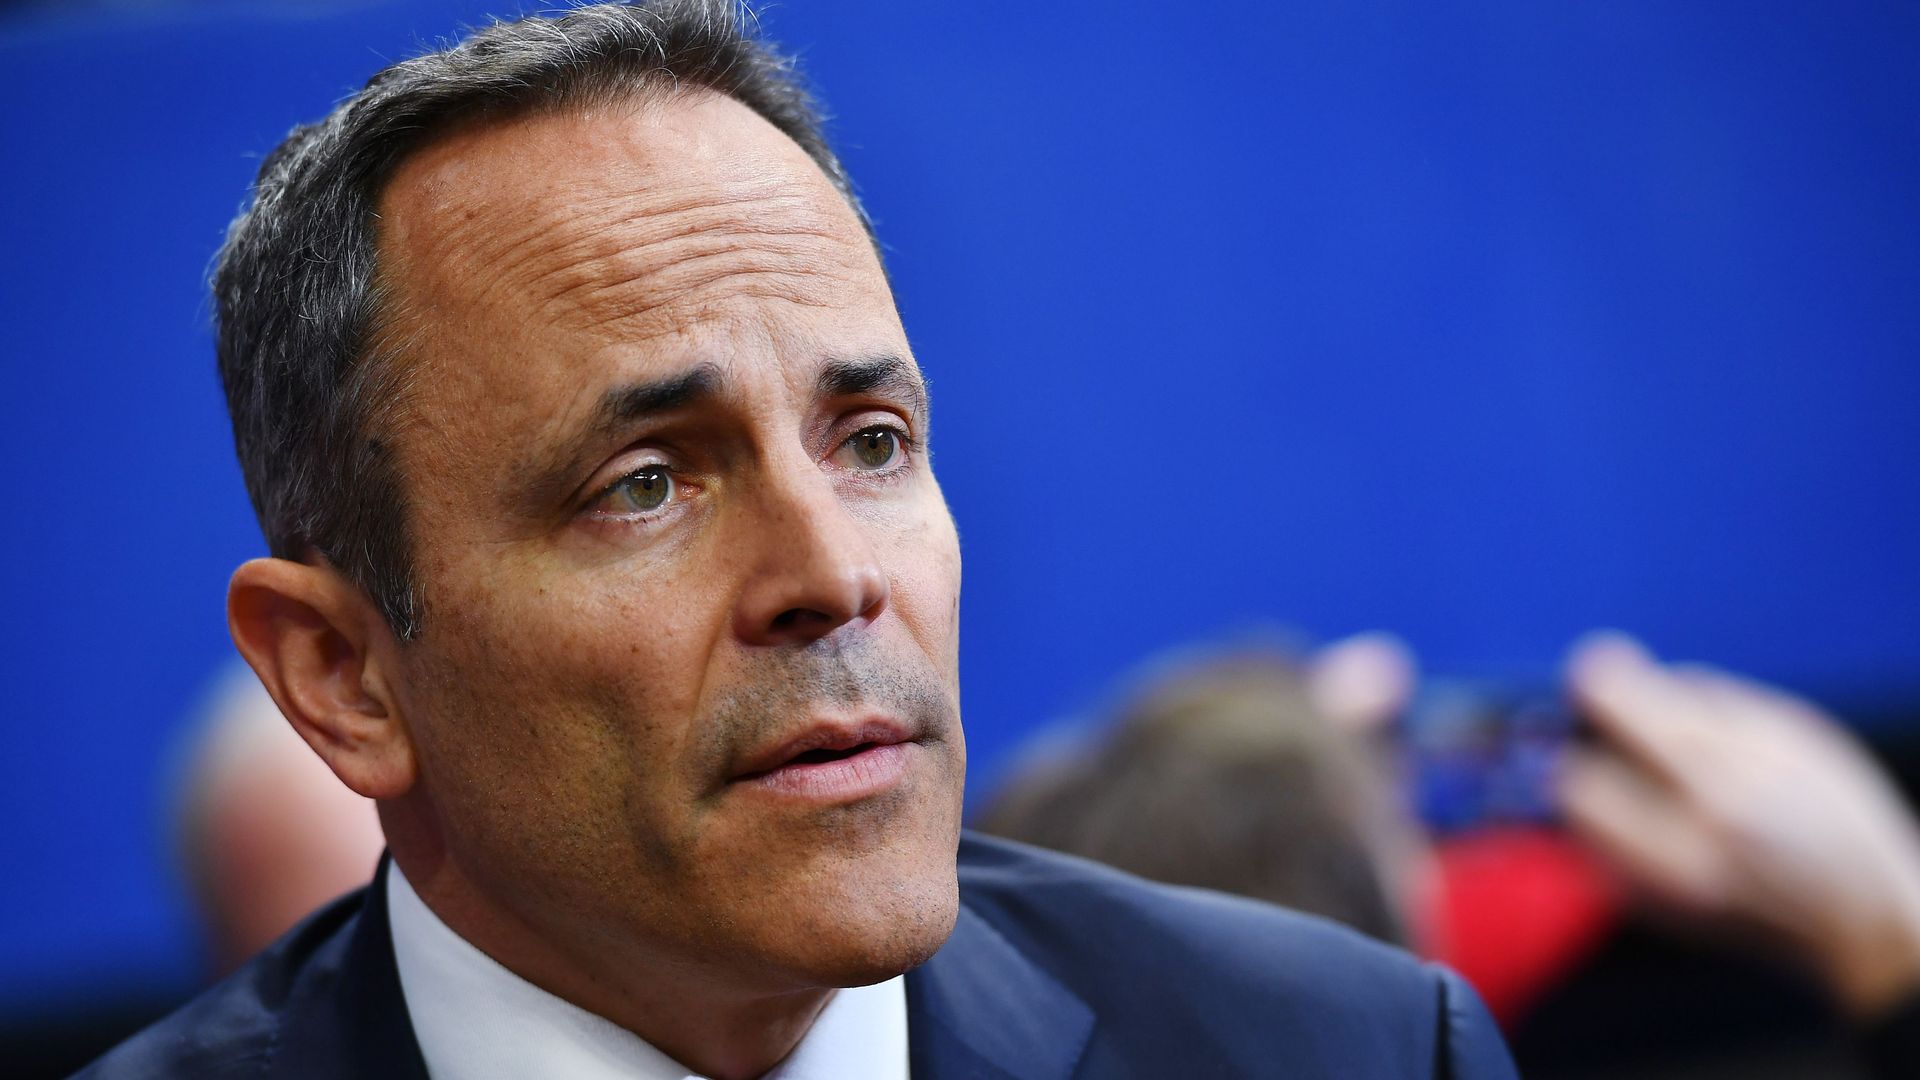 This image is a close up of Matt Bevin